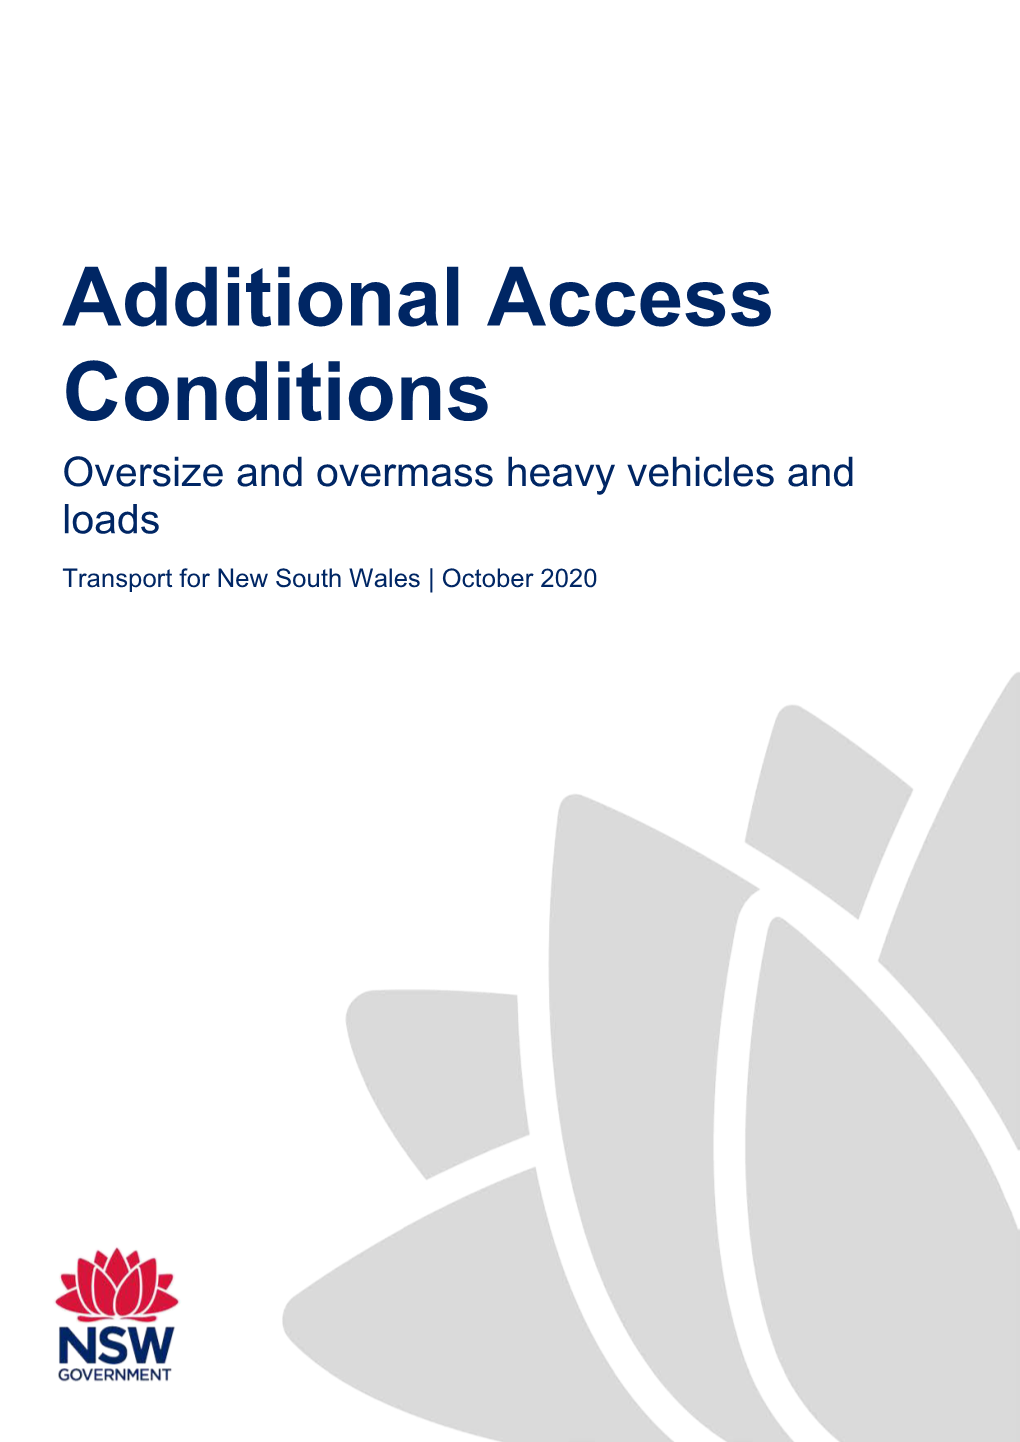 Additional Access Conditions for Oversize and Overmass Heavy Vehicles and Loads